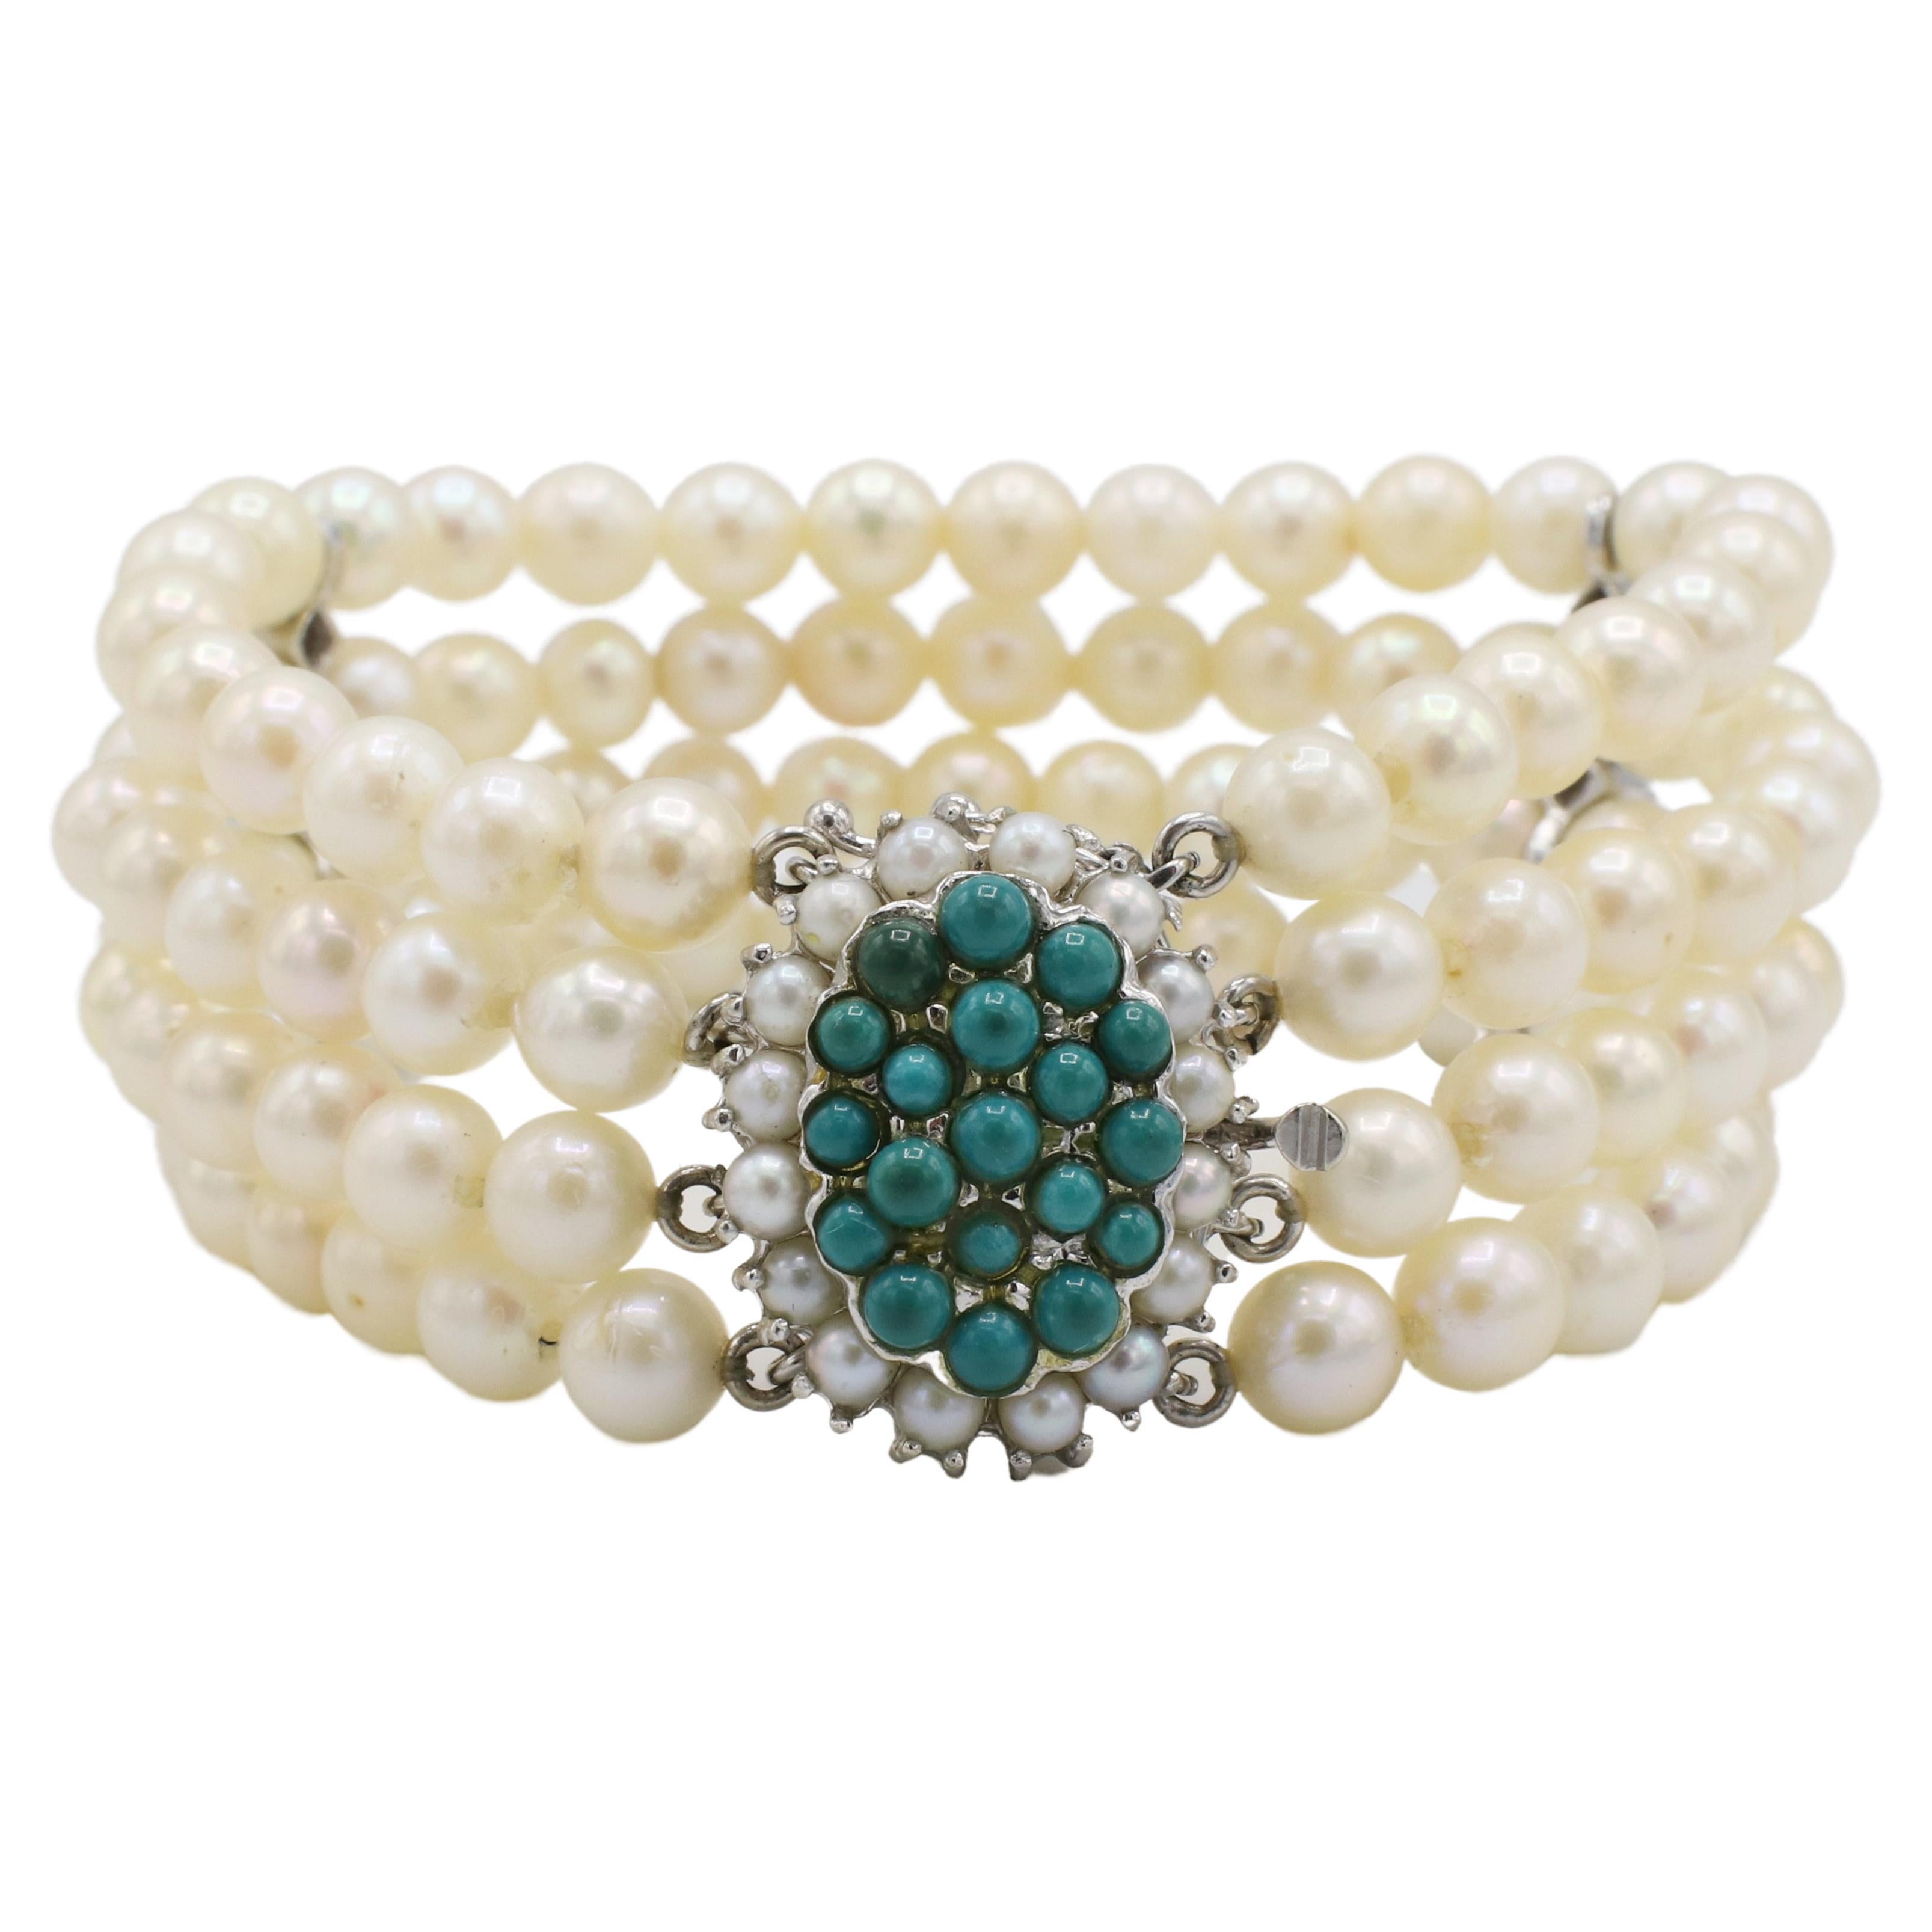 14 Karat White Gold 4-Row Pearl Bracelet With Turquoise Stations & Clasp For Sale